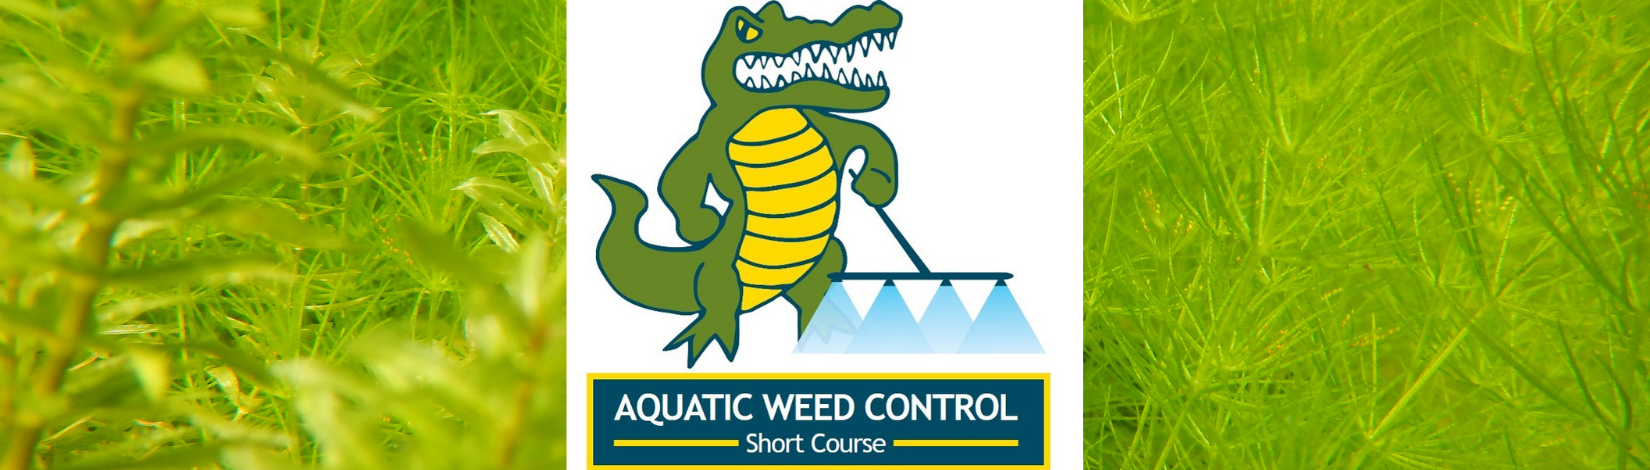 Aquatic Weed Control Short Course - University of Florida, Institute of  Food and Agricultural Sciences - UF/IFAS